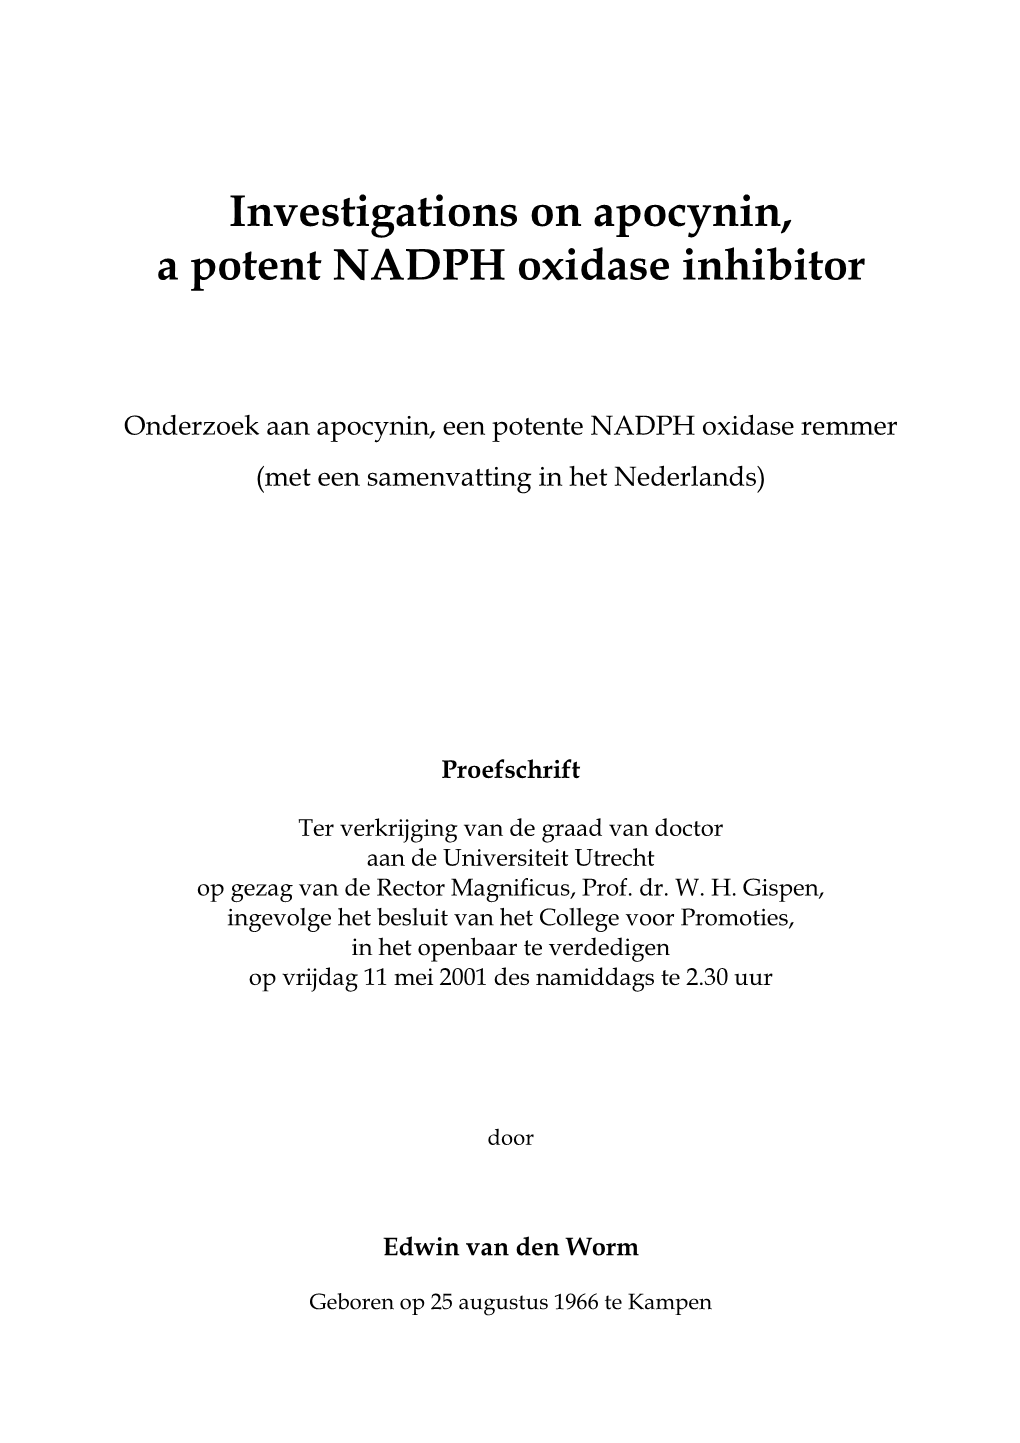 Investigations on Apocynin, a Potent NADPH Oxidase Inhibitor